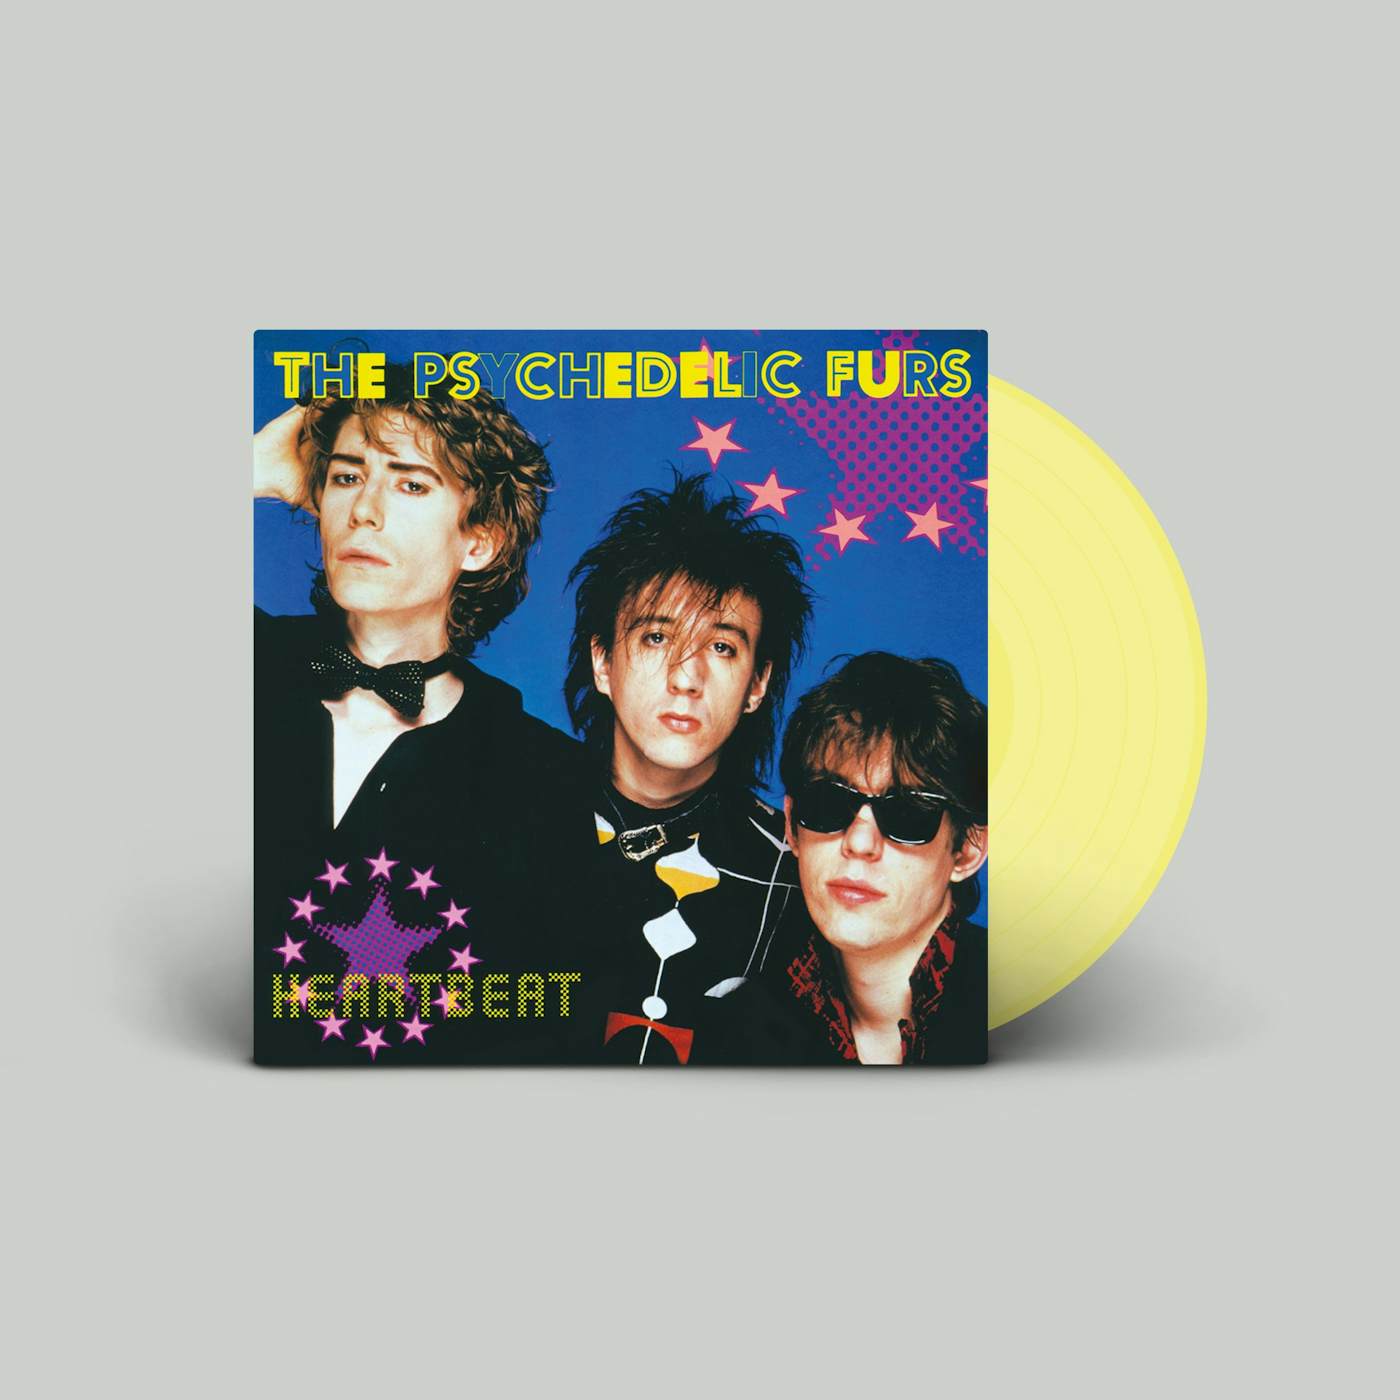 The Psychedelic Furs Heaven / Heartbeat - Pale Yellow Vinyl 7"